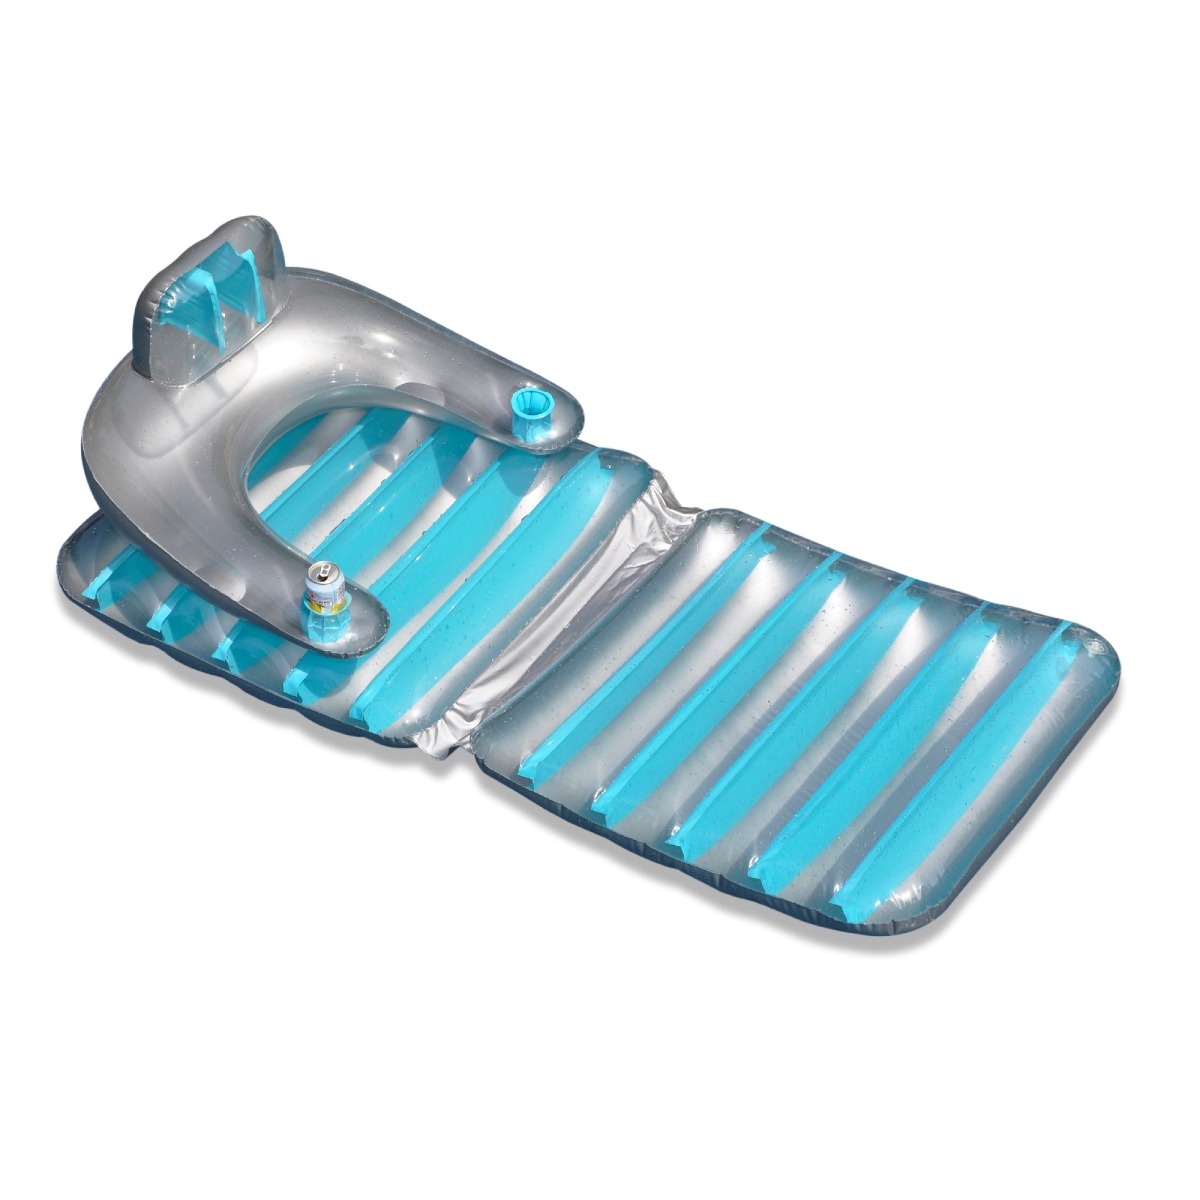 32551822 74 in. Inflatable Swimming Pool Folding Lounge Chair Float, Silver & Blue -  Pool Central